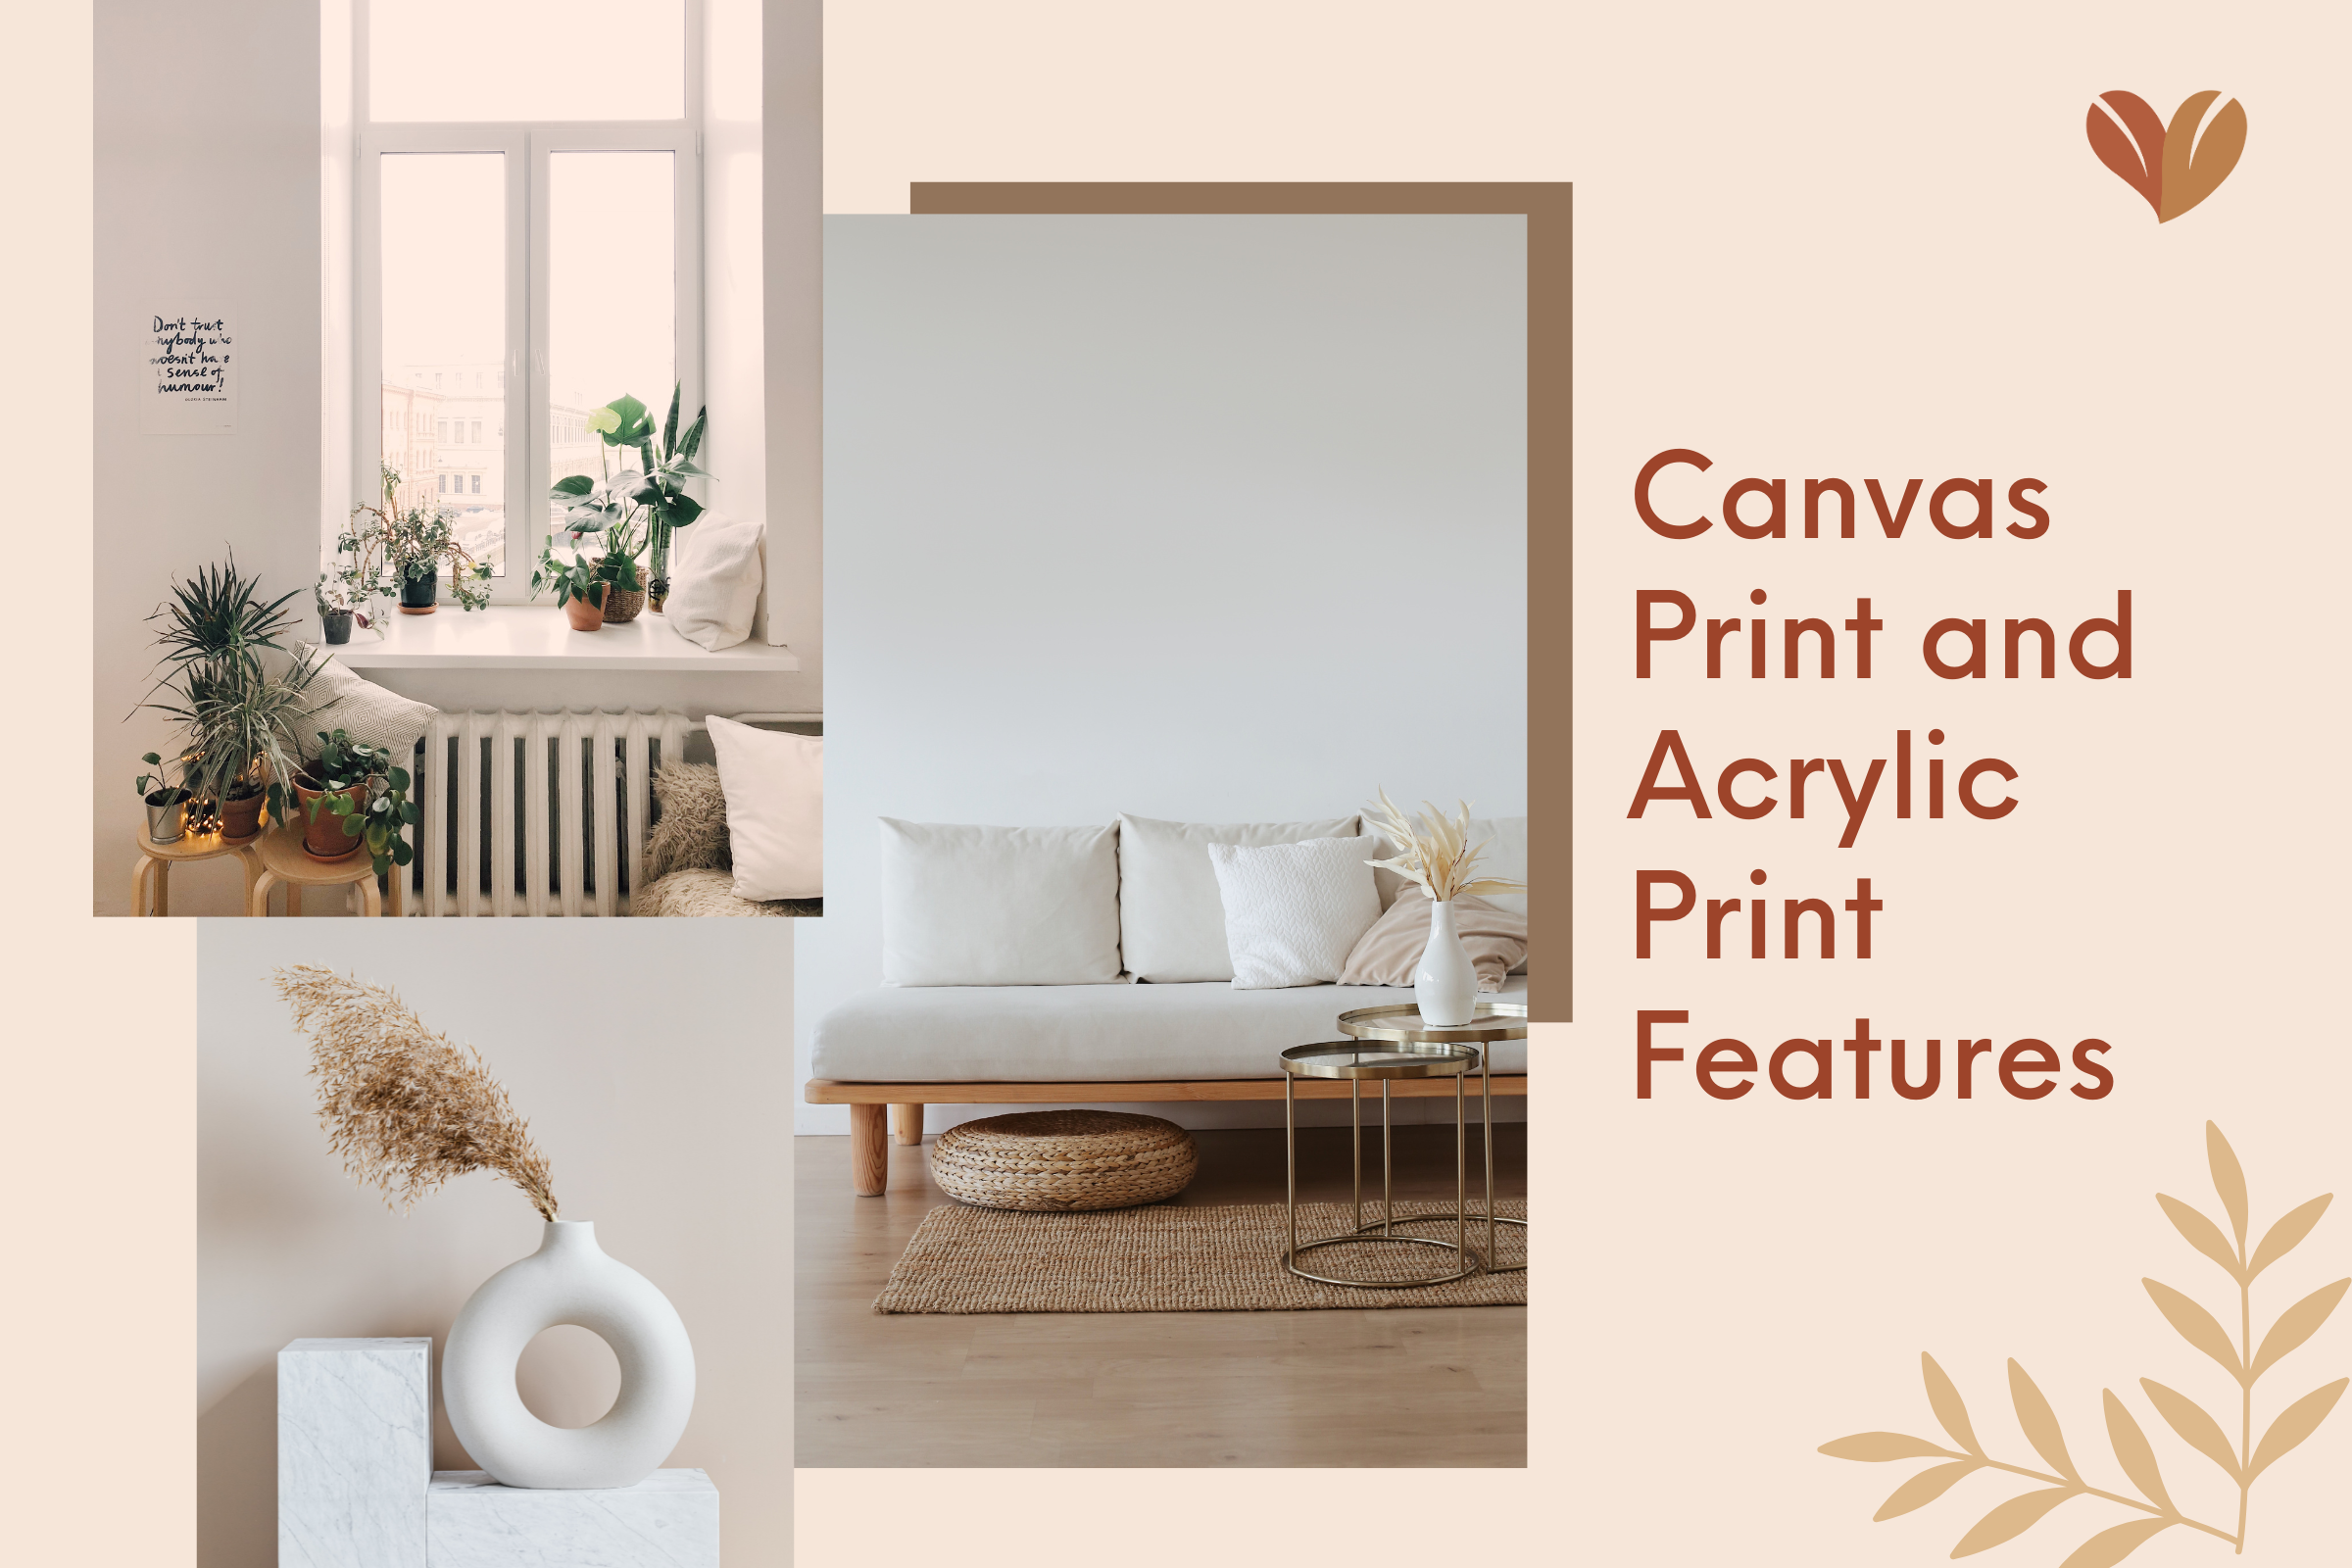 Get ready to dive into the world of acrylic prints and canvas prints – which one will suit your style?